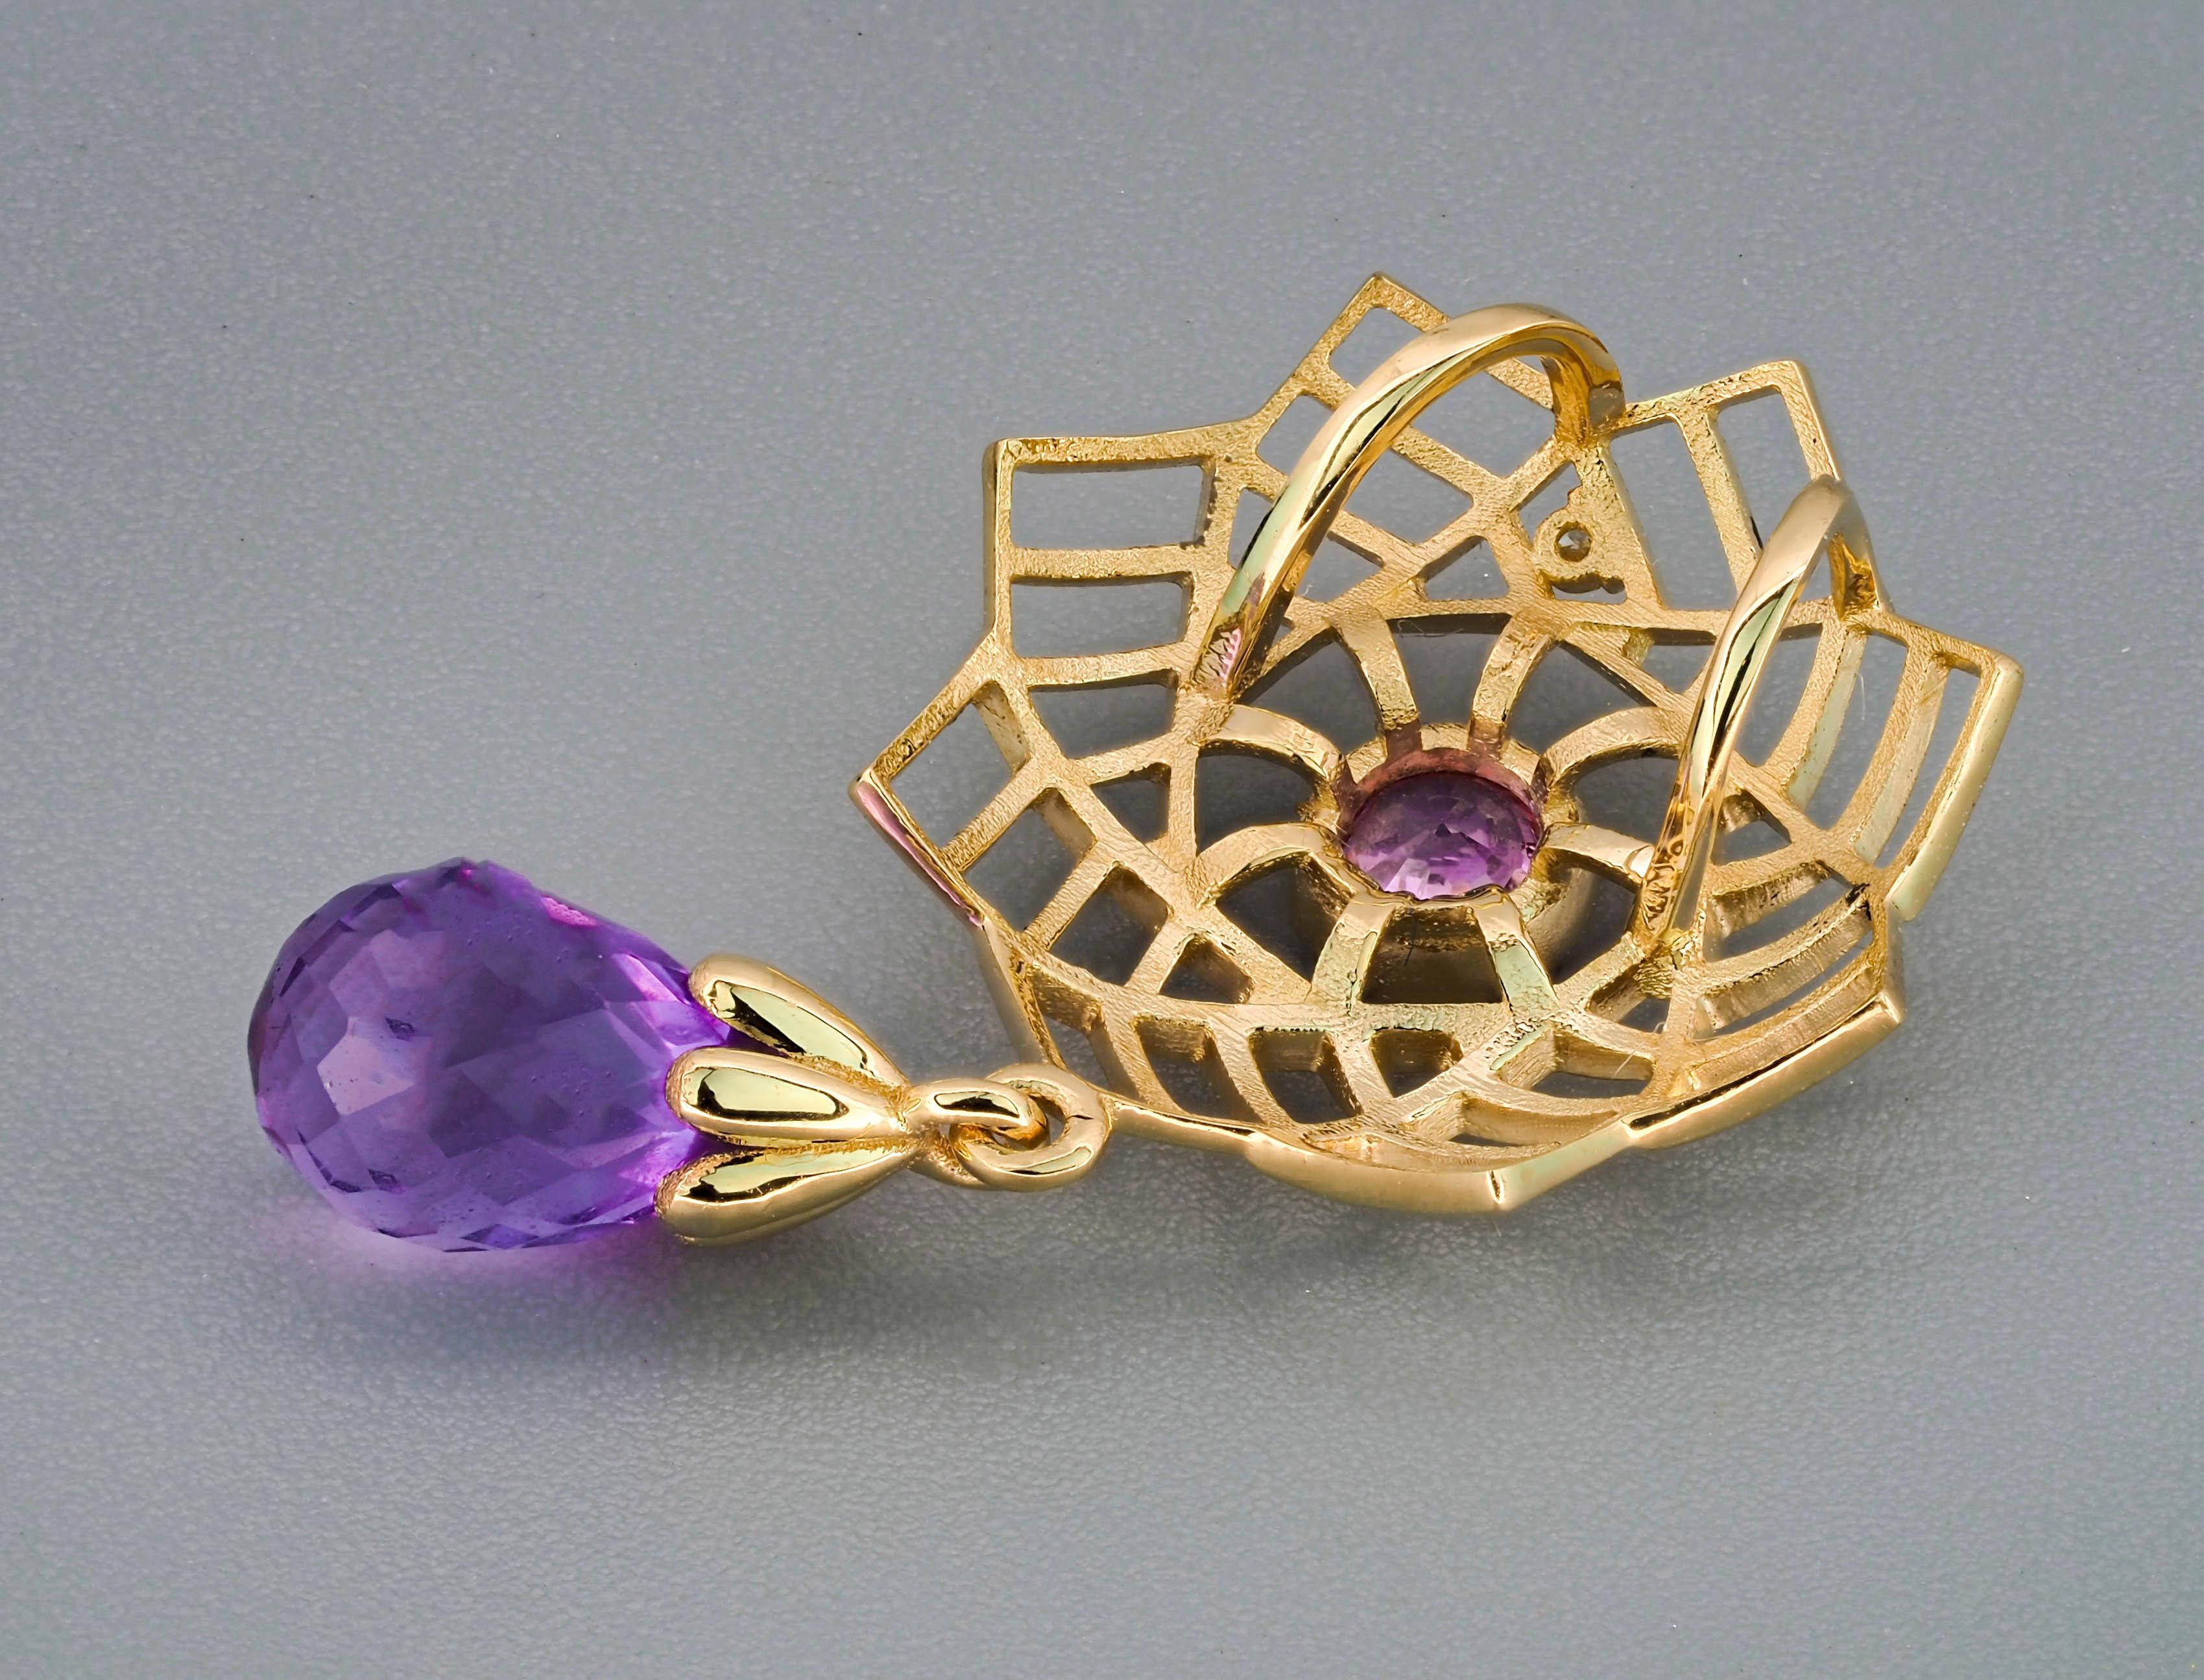 Amethyst Pendant in 14k Gold, Pink Sapphire Pendant in 14k Gold For Sale 2